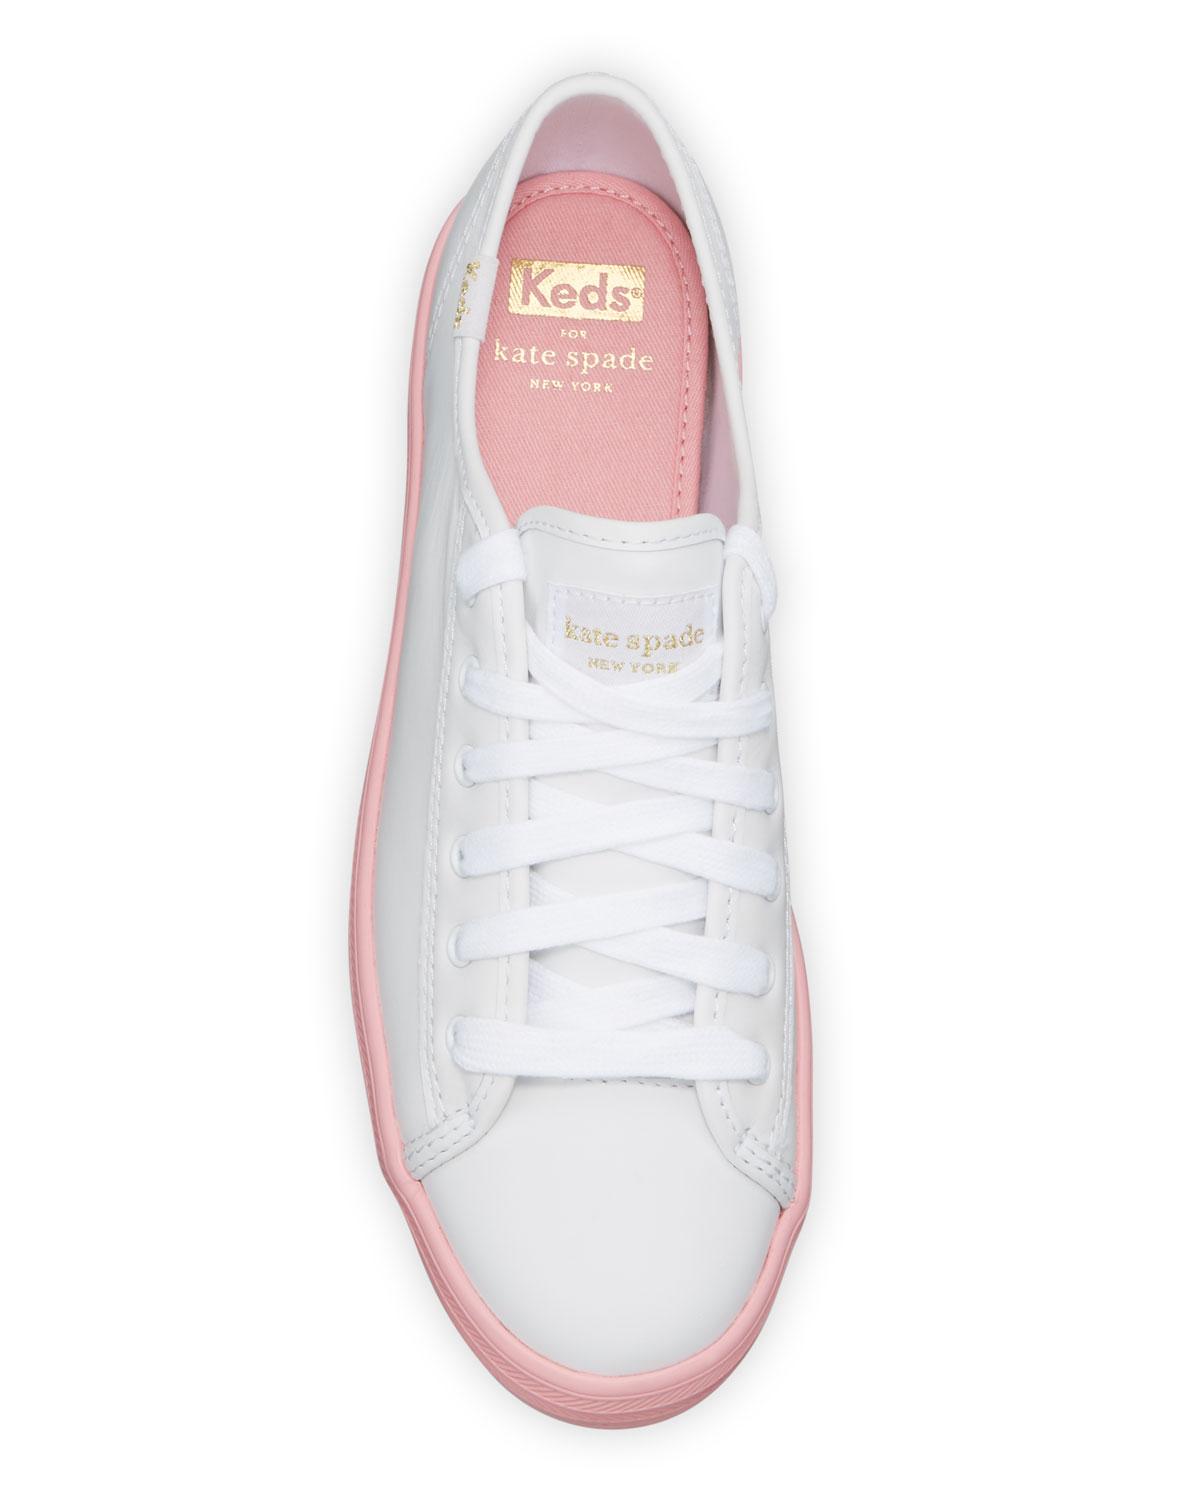 Keds X Kate Spade Triple Kick Leather Sneakers in White Pink (White) - Lyst